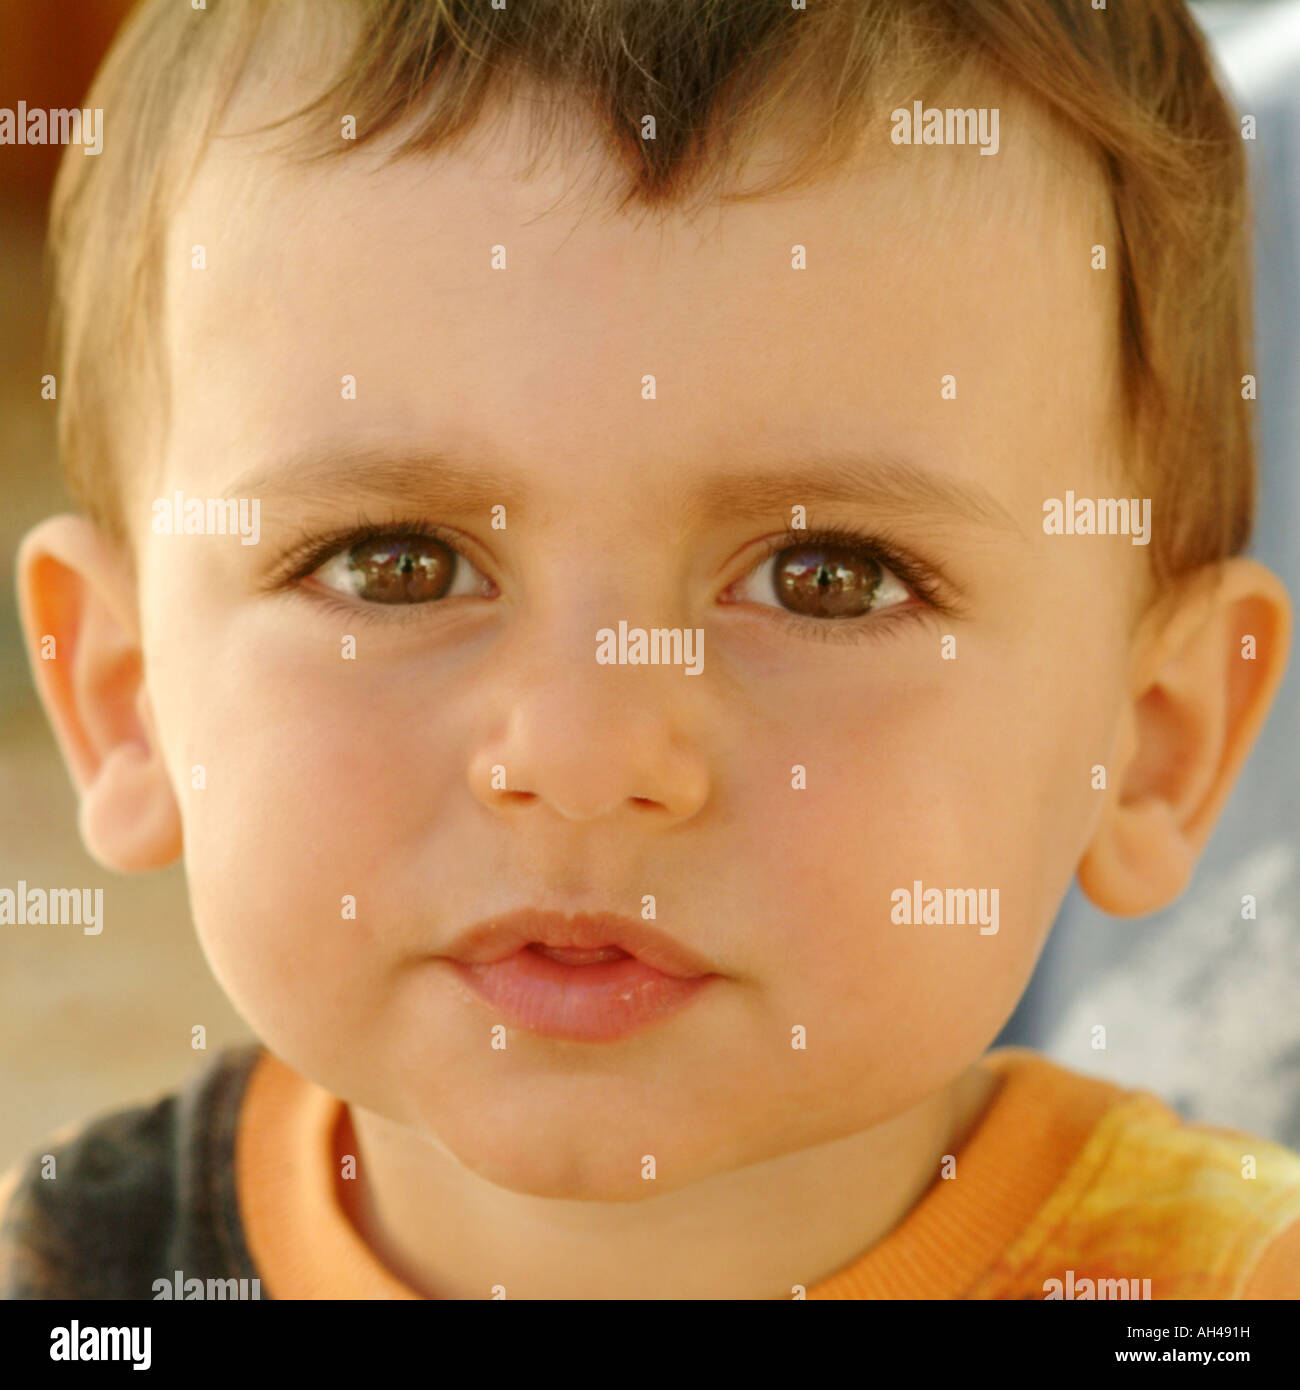 Beautiful child with big eyes and a serious expression Stock Photo